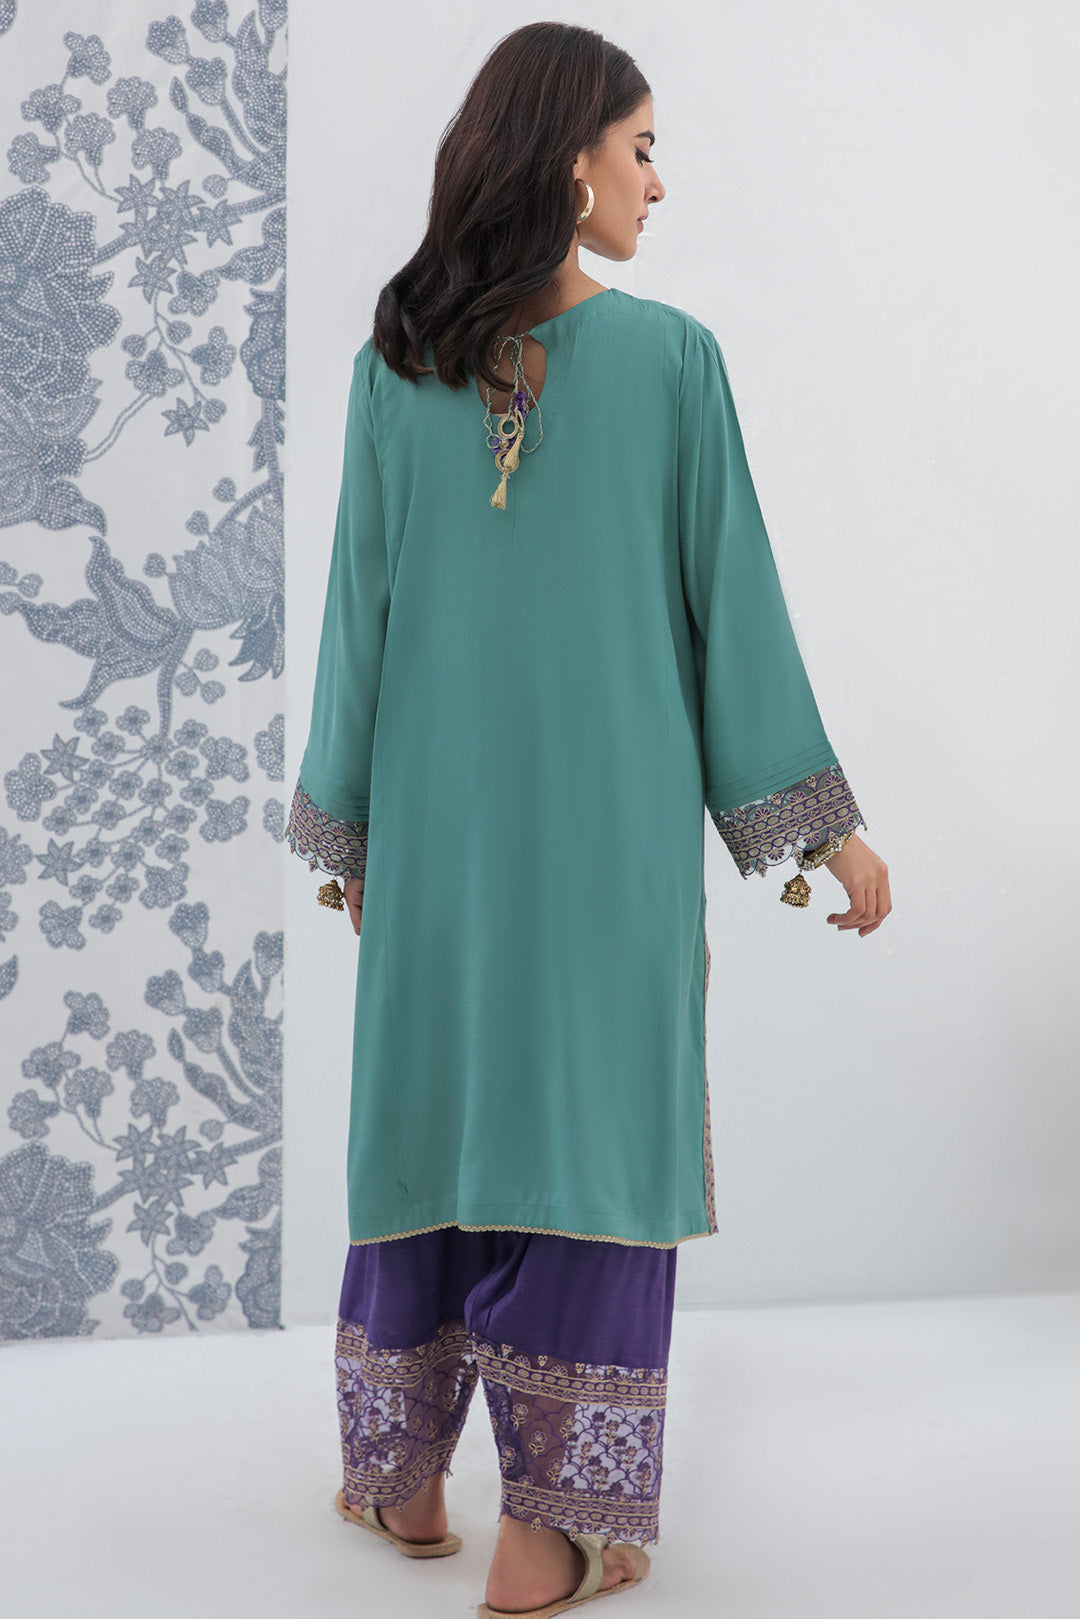 2 Piece - Embroidered Raw Silk Suit L0293